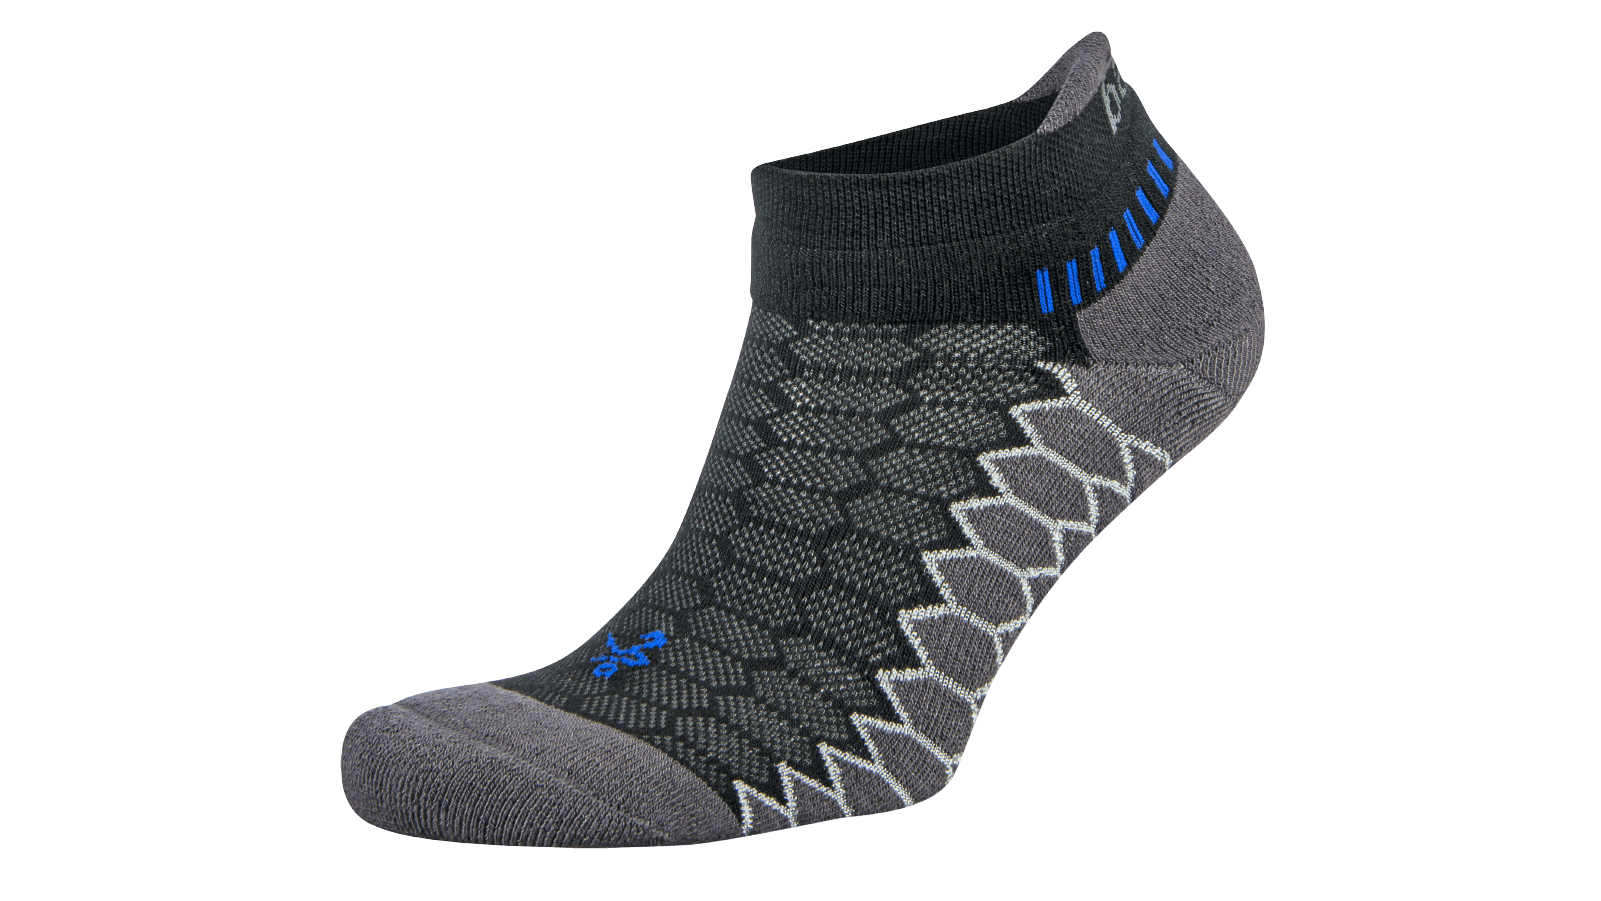 A lateral view of the Balega Silver no show running sock in the color black carbon.